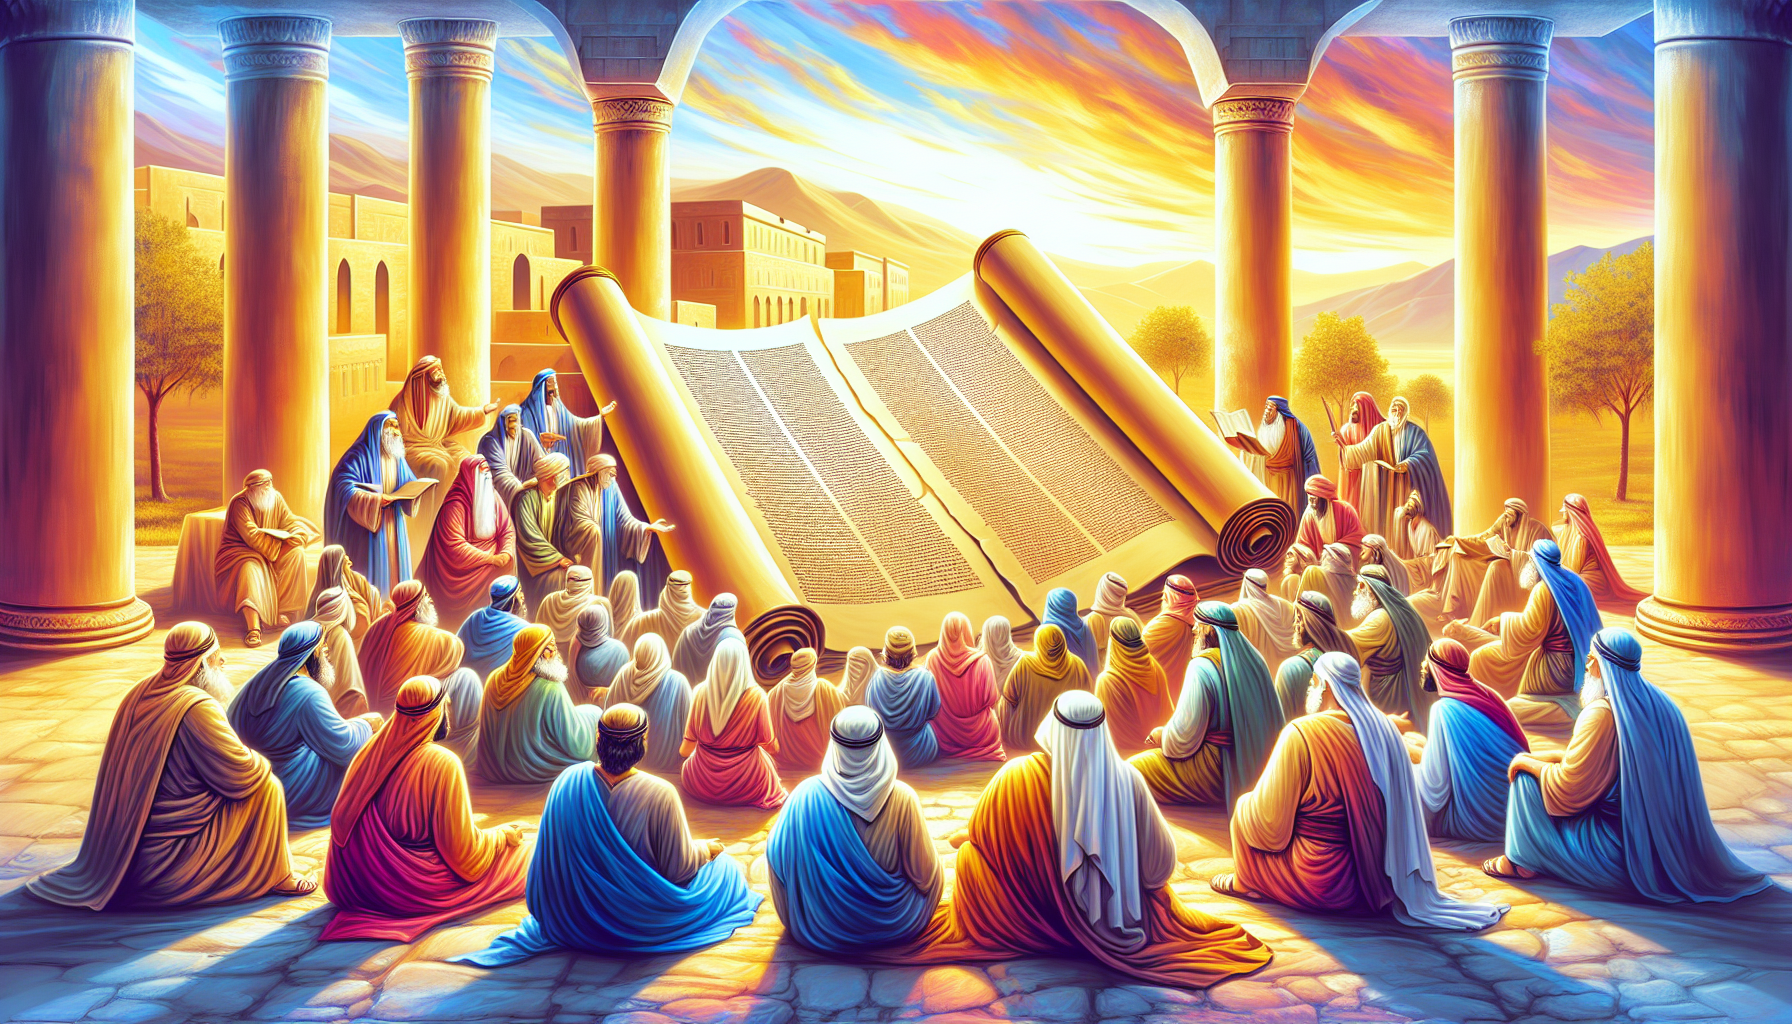 An artistic depiction of a diverse group of ancient people gathering around a large open scroll in a Biblical landscape, representing the Gentiles learning about the scriptures, with Middle Eastern ar